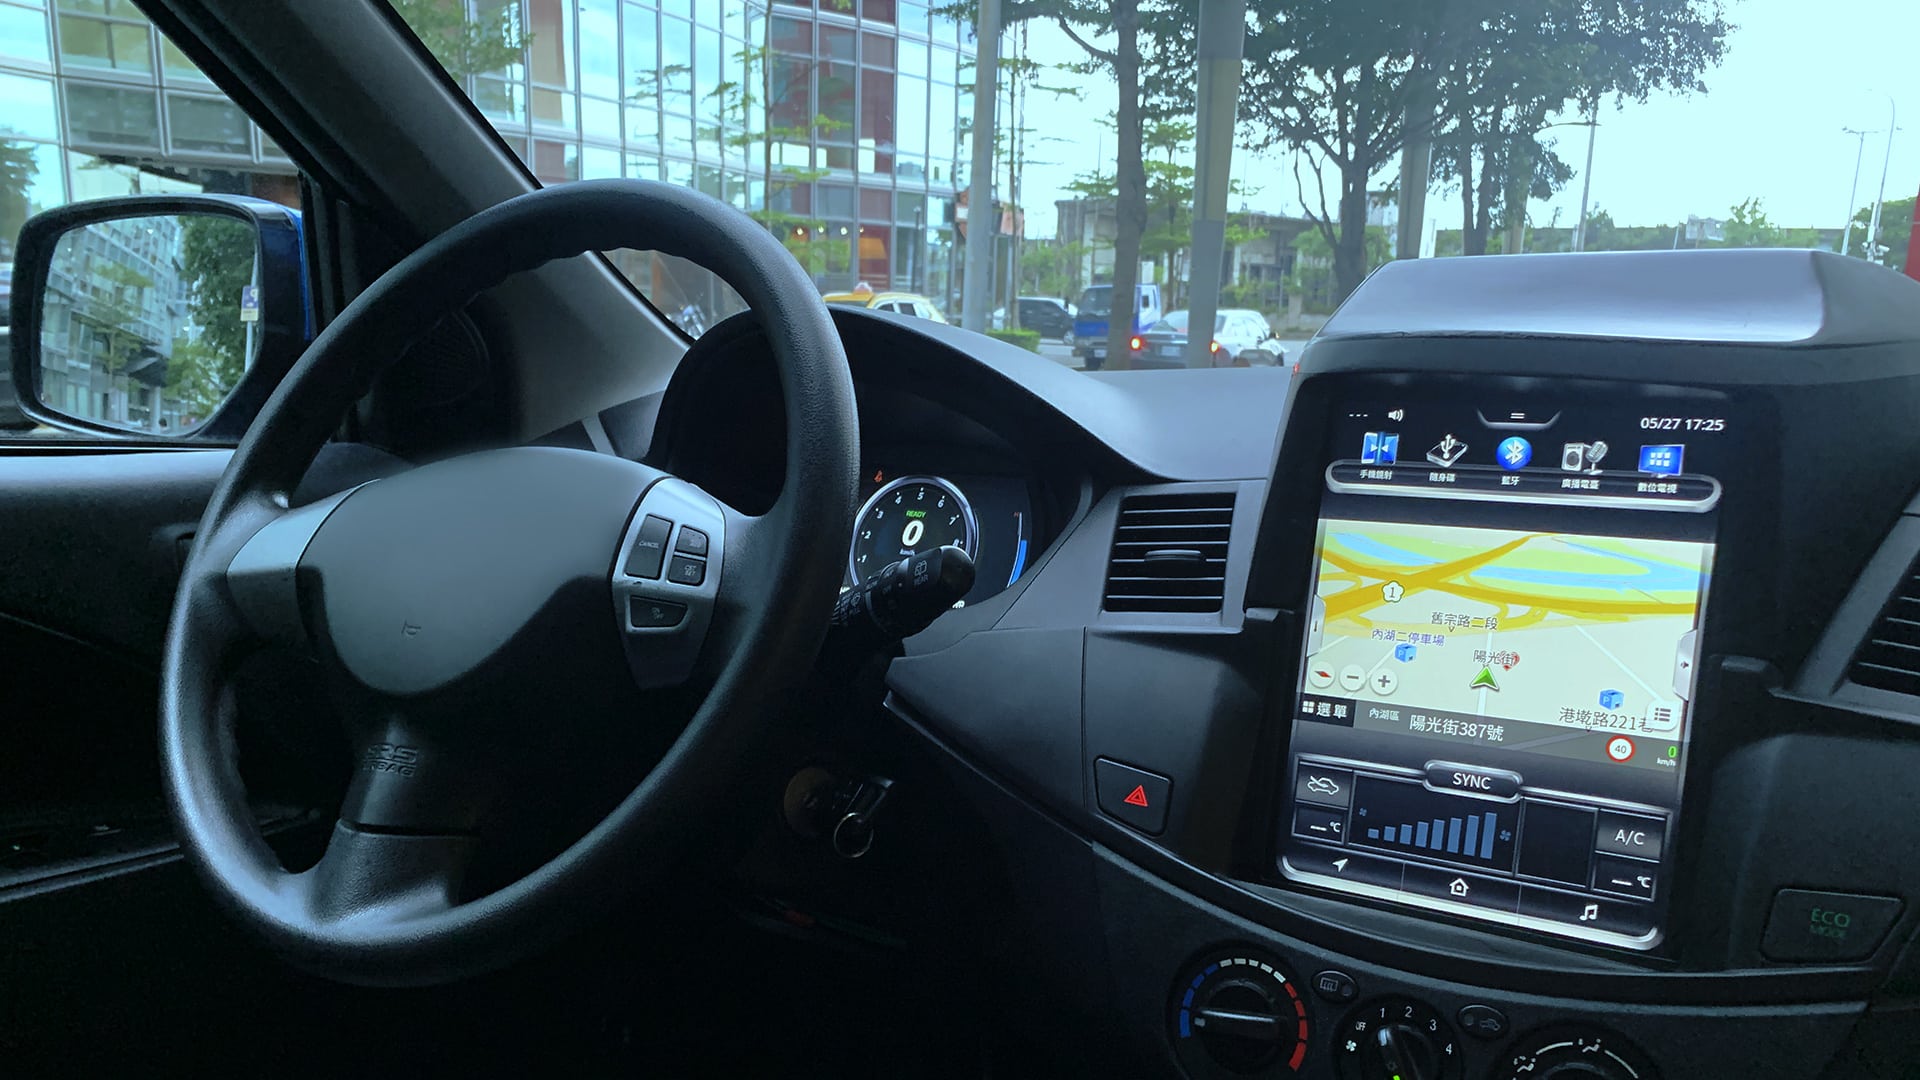 A car's dashboard with an in-vehicle infotainment (IVI) system displaying a navigation map, set against a city street view through the windshield.